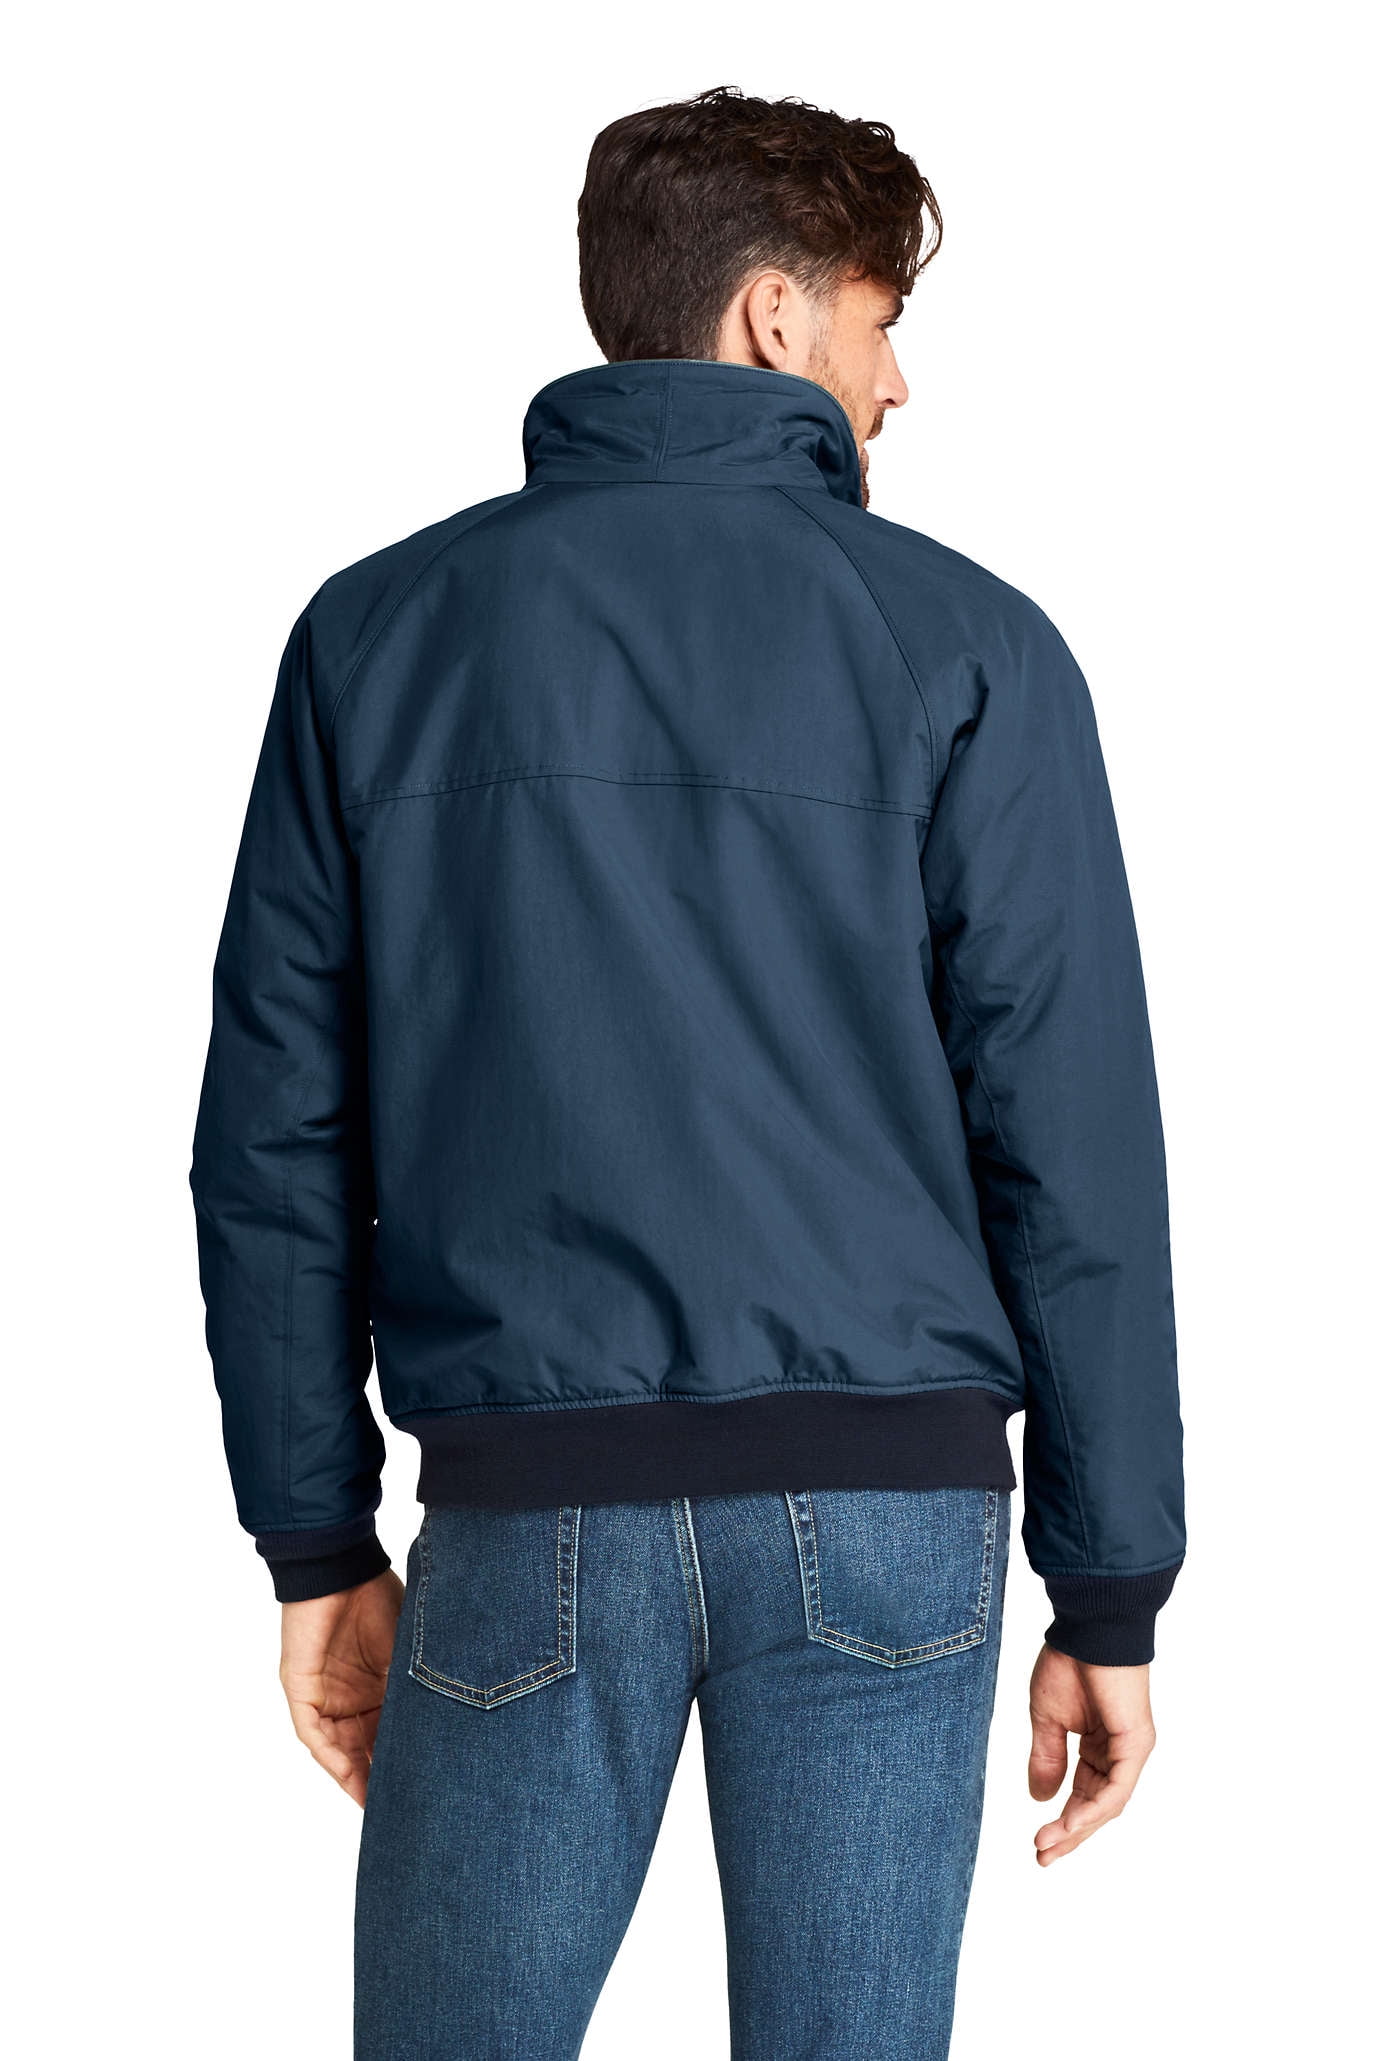 Top more than 68 lands end squall jacket super hot - in.thdonghoadian